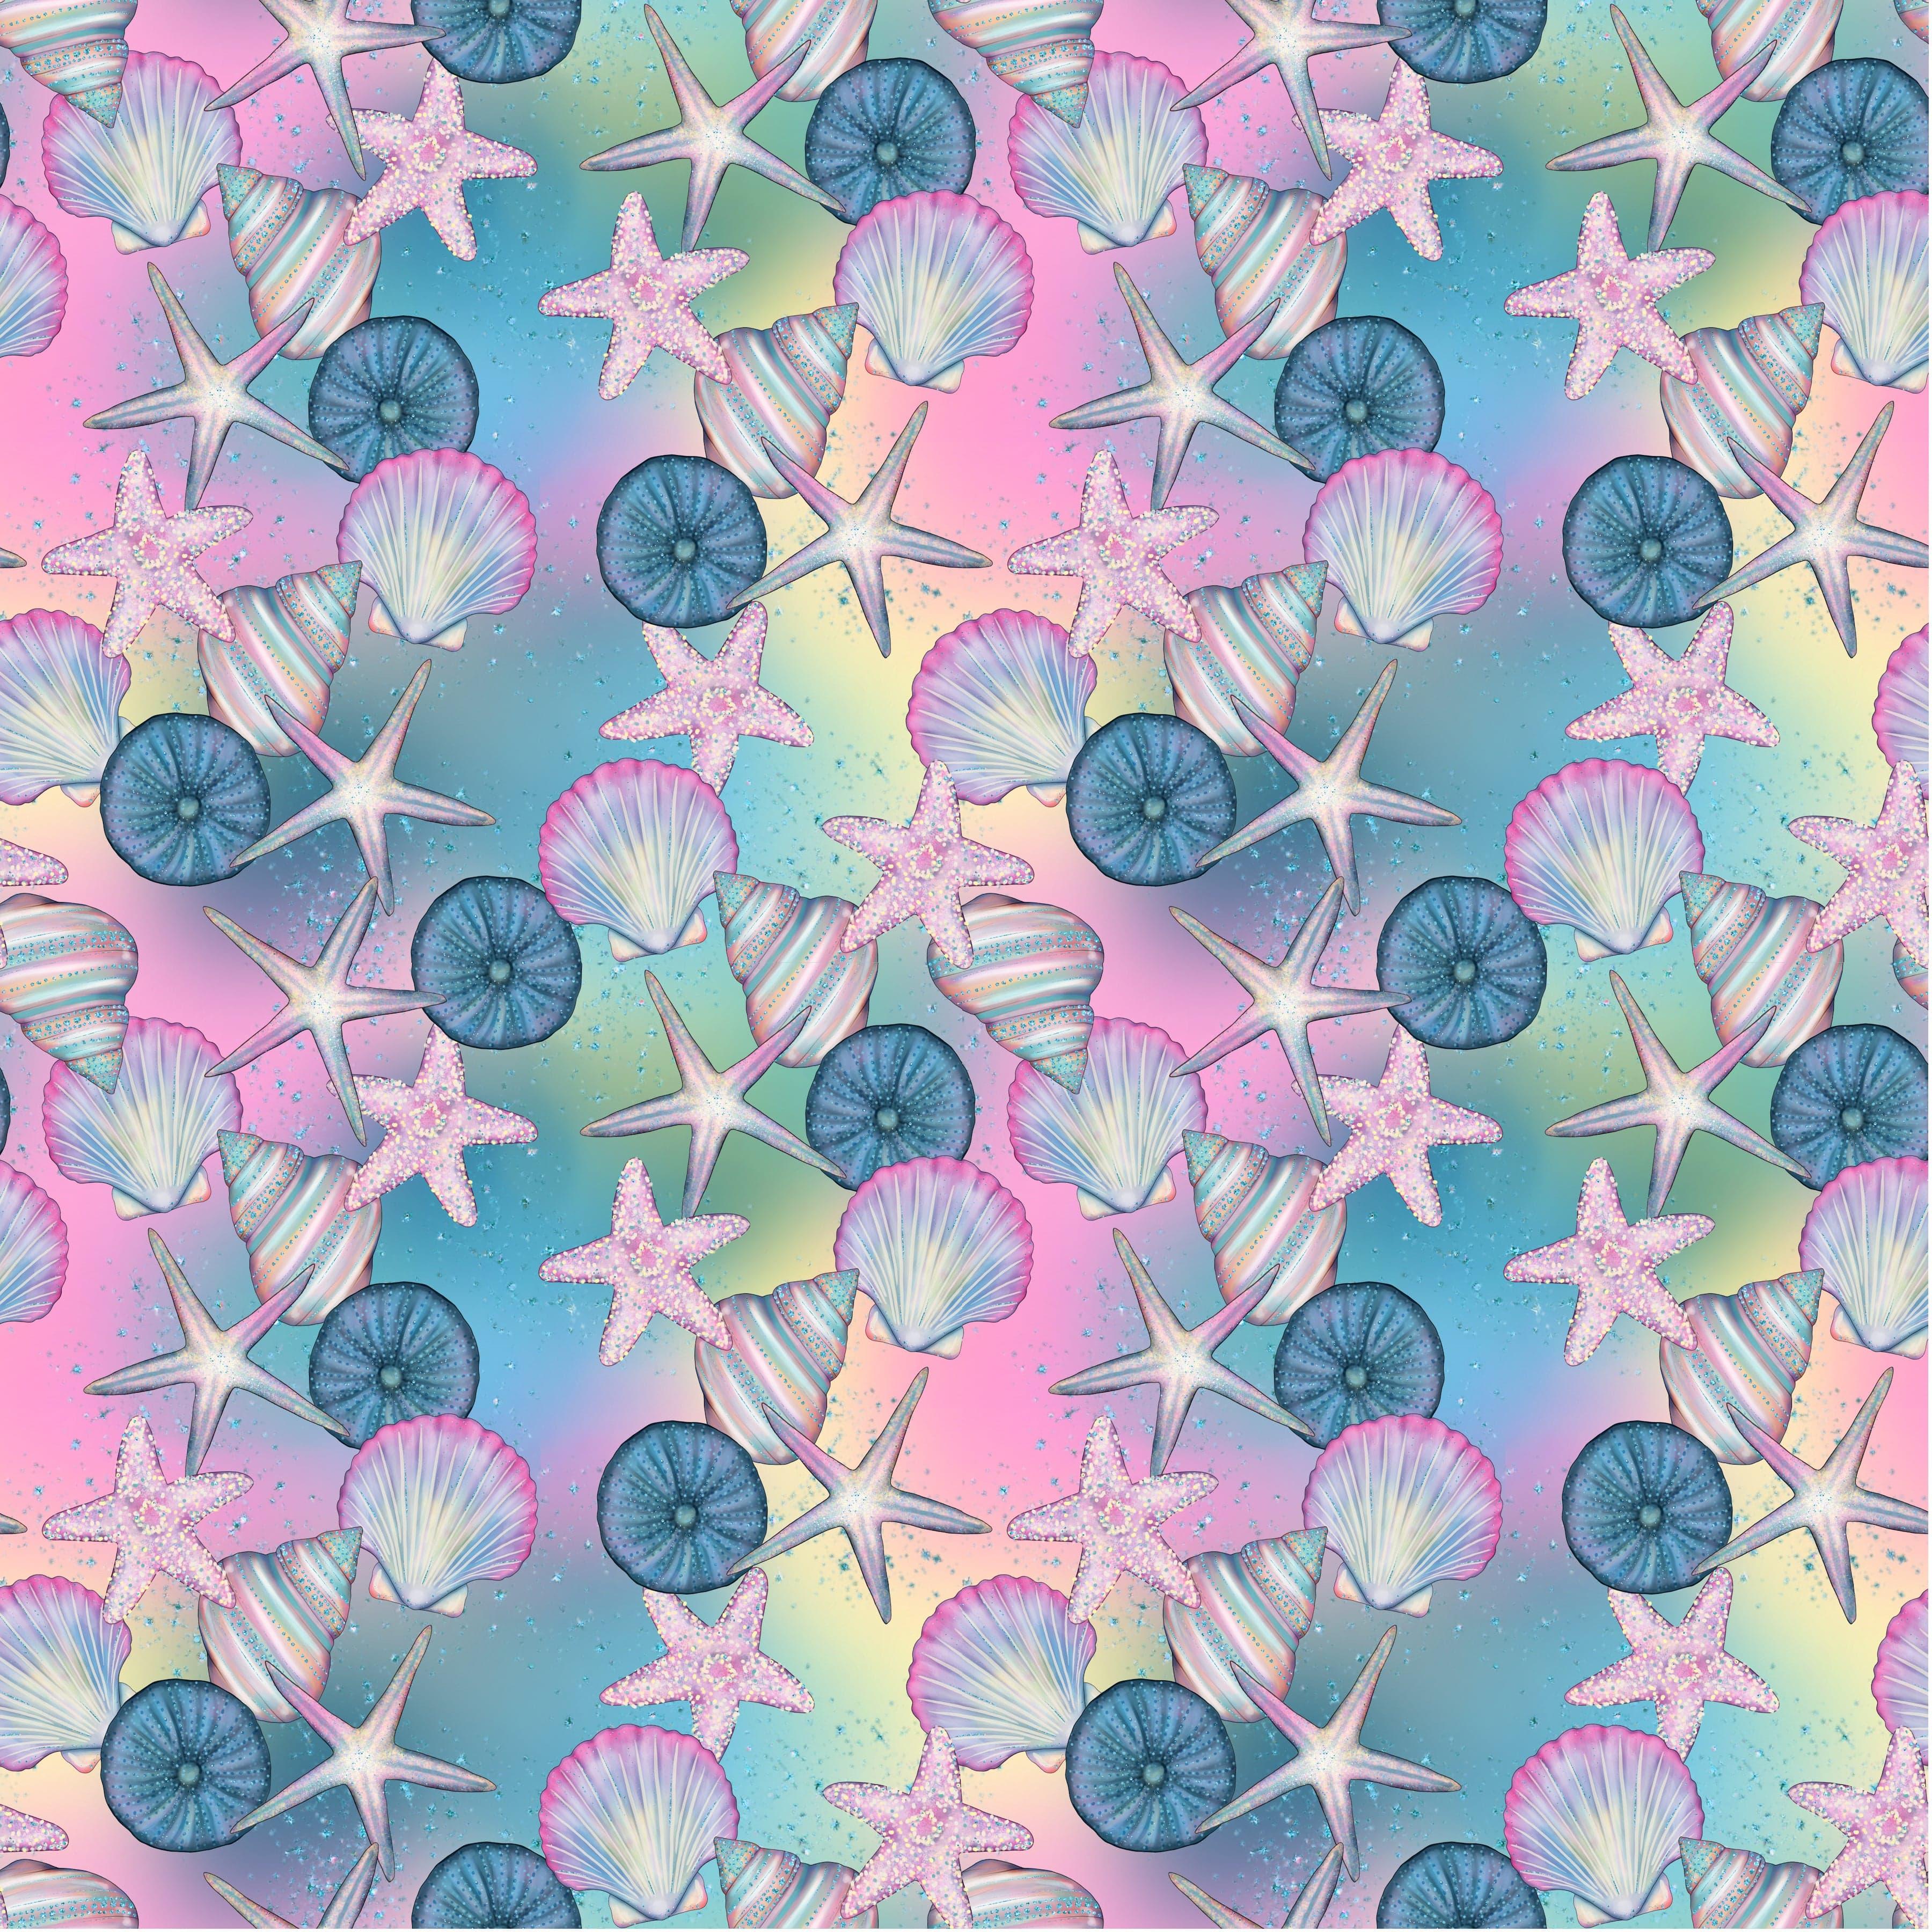 Gaynor Carradice's Mermaids & Seashells Collection Seashells Galore 12 x 12 Double-Sided Scrapbook Paper by SSC Designs - Scrapbook Supply Companies